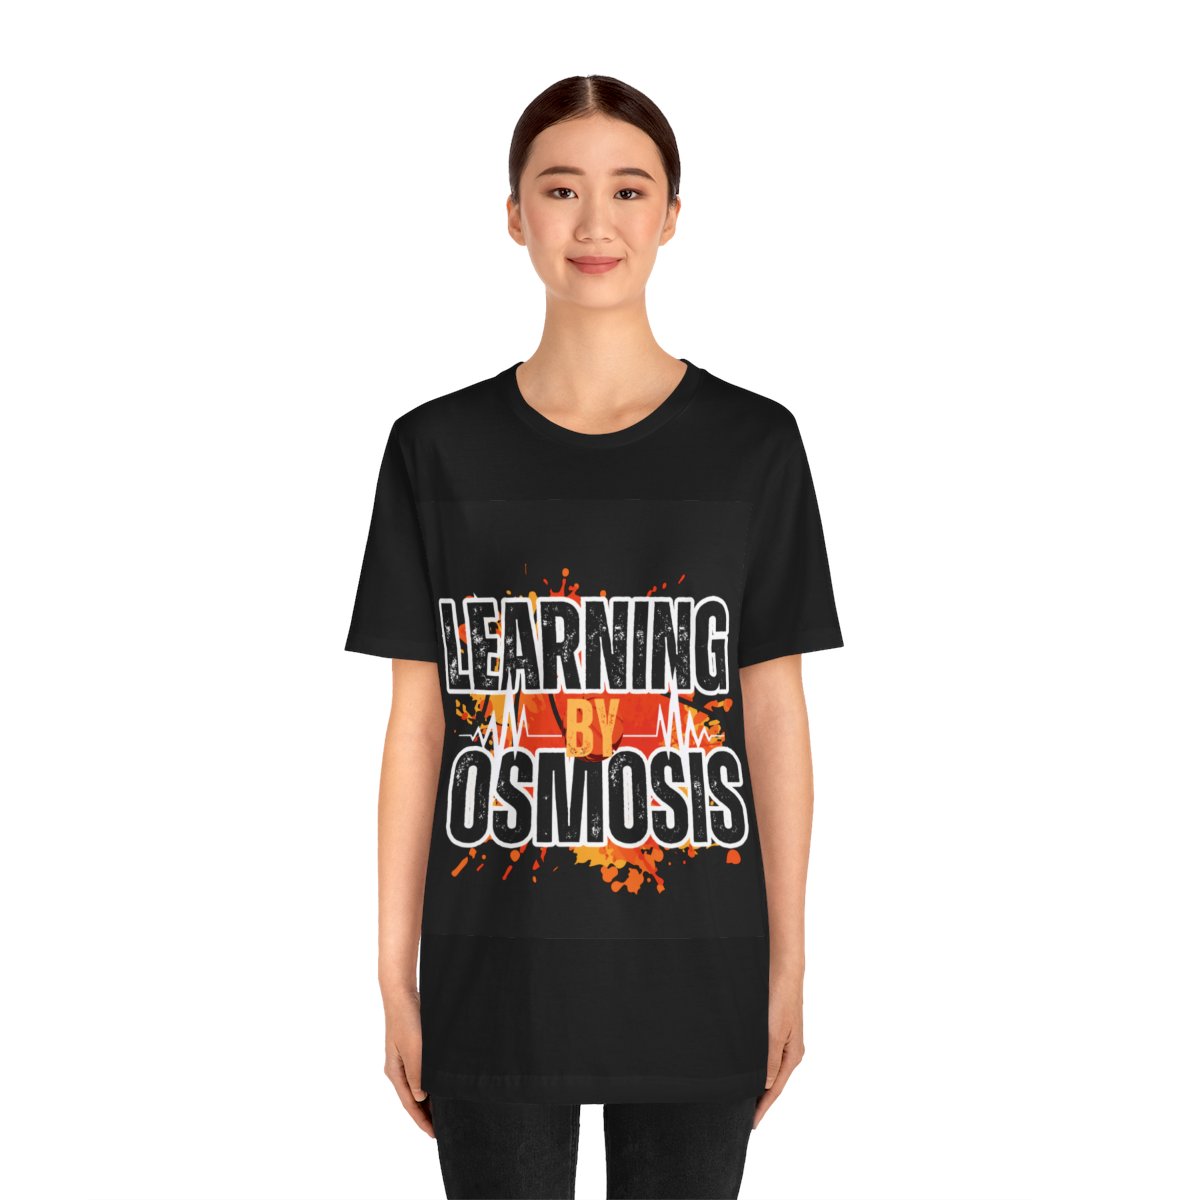 Learning By Osmosis shirt Express Delivery available product thumbnail image